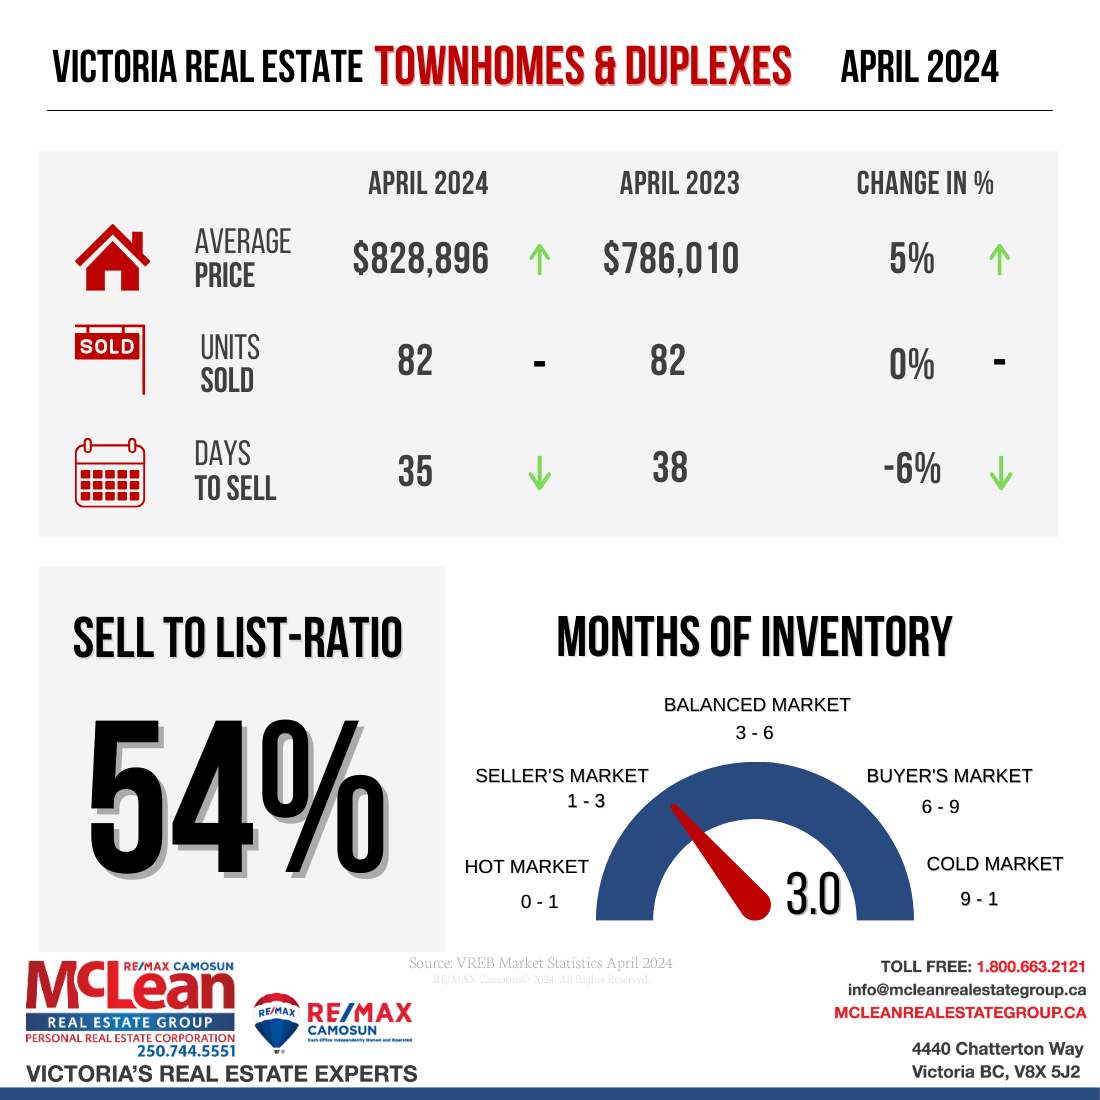 April 2024 townhomes and duplexes realty stats